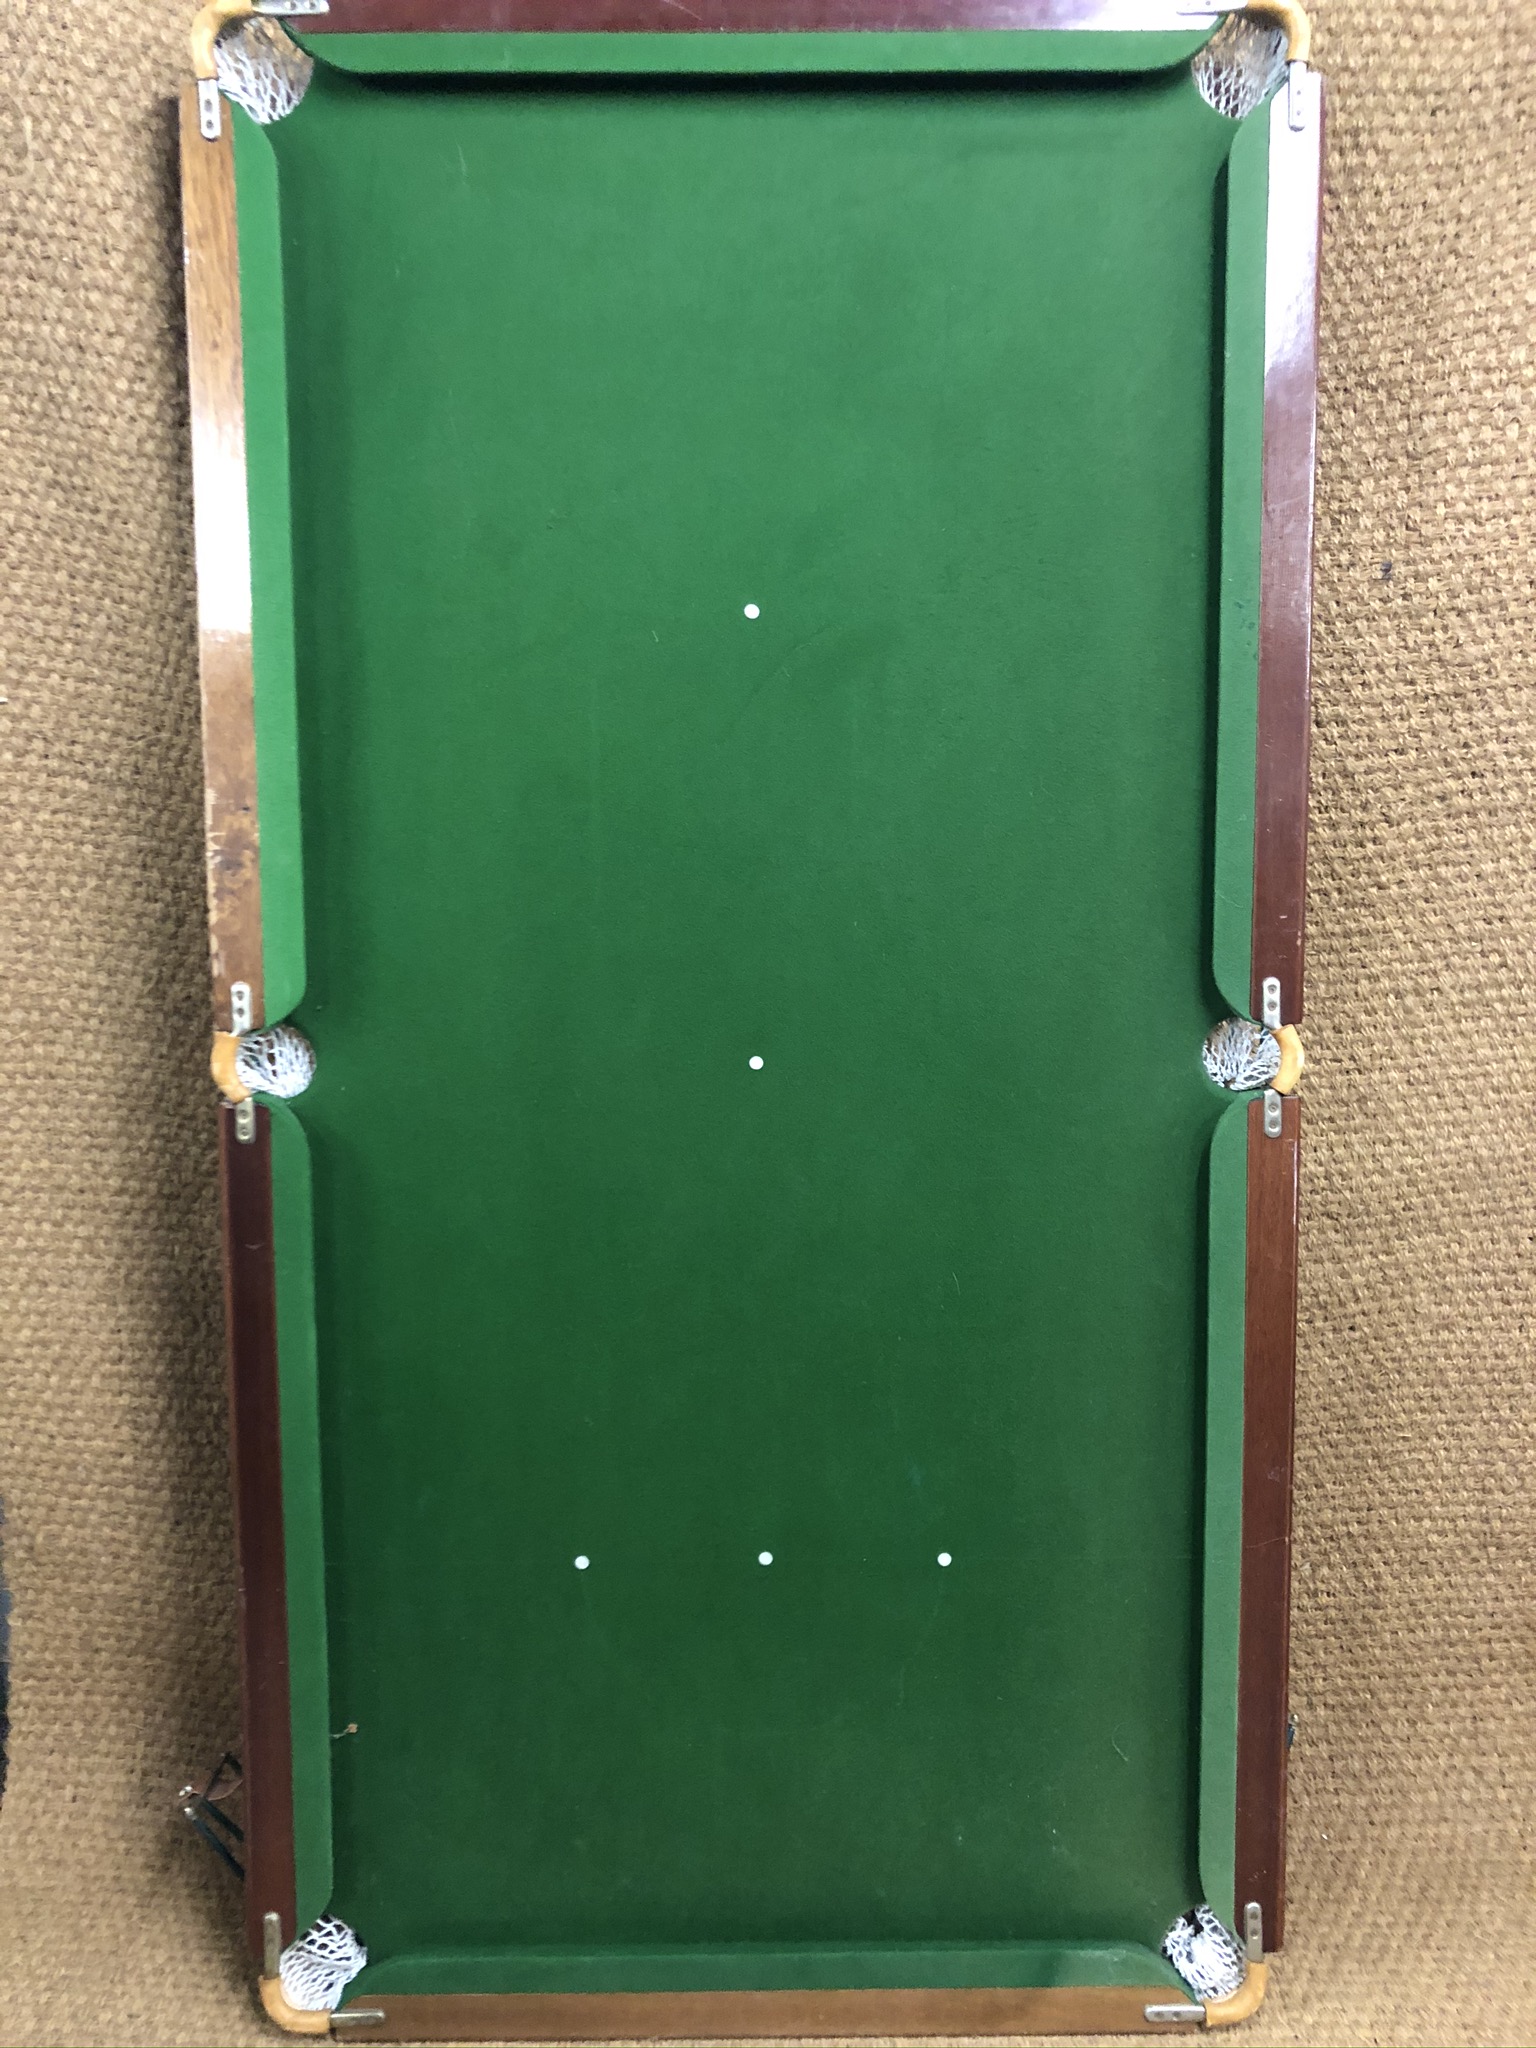 An Power Glide Embassy World Champion 6' snooker table with cues etc.